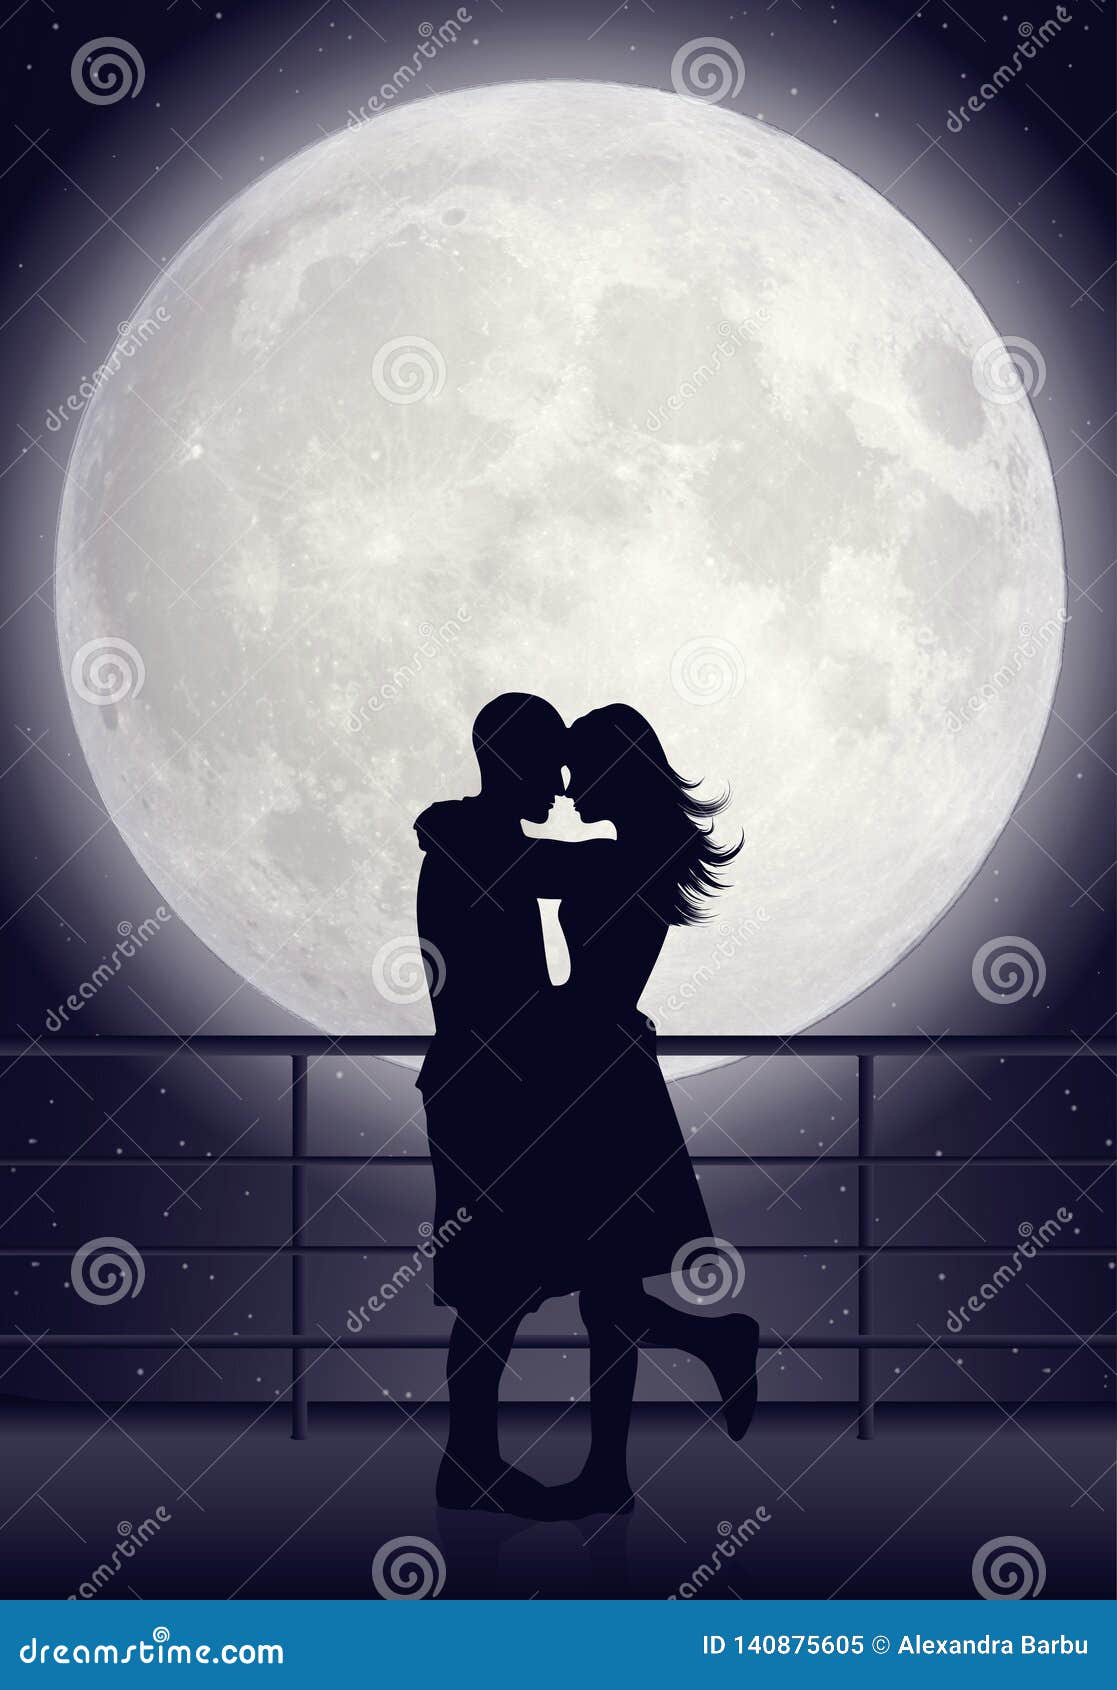 couple kissing in moonlight